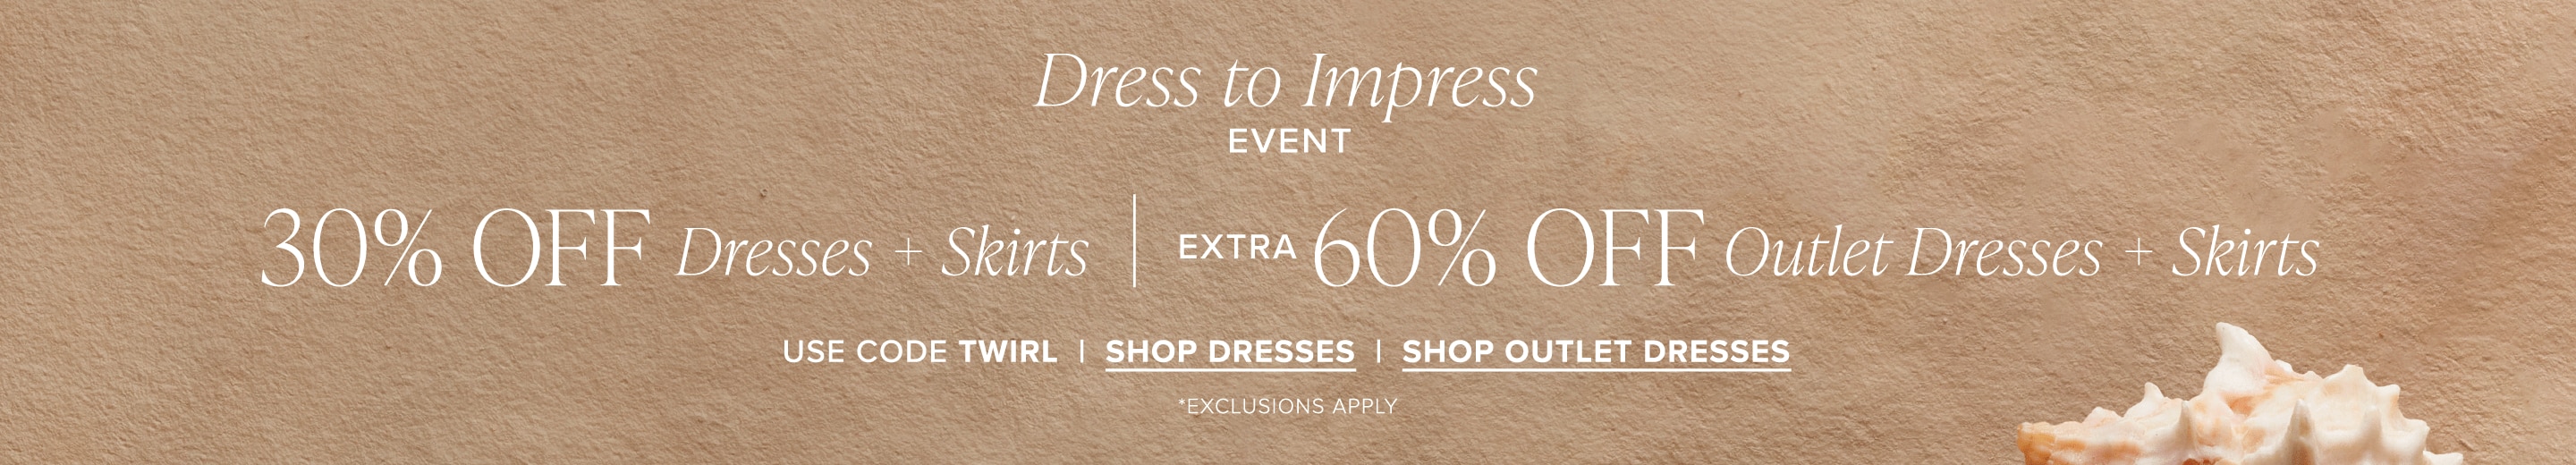 30% Off All Dresses and Skirts + Extra 60% Off Outlet Dresses and Skirts